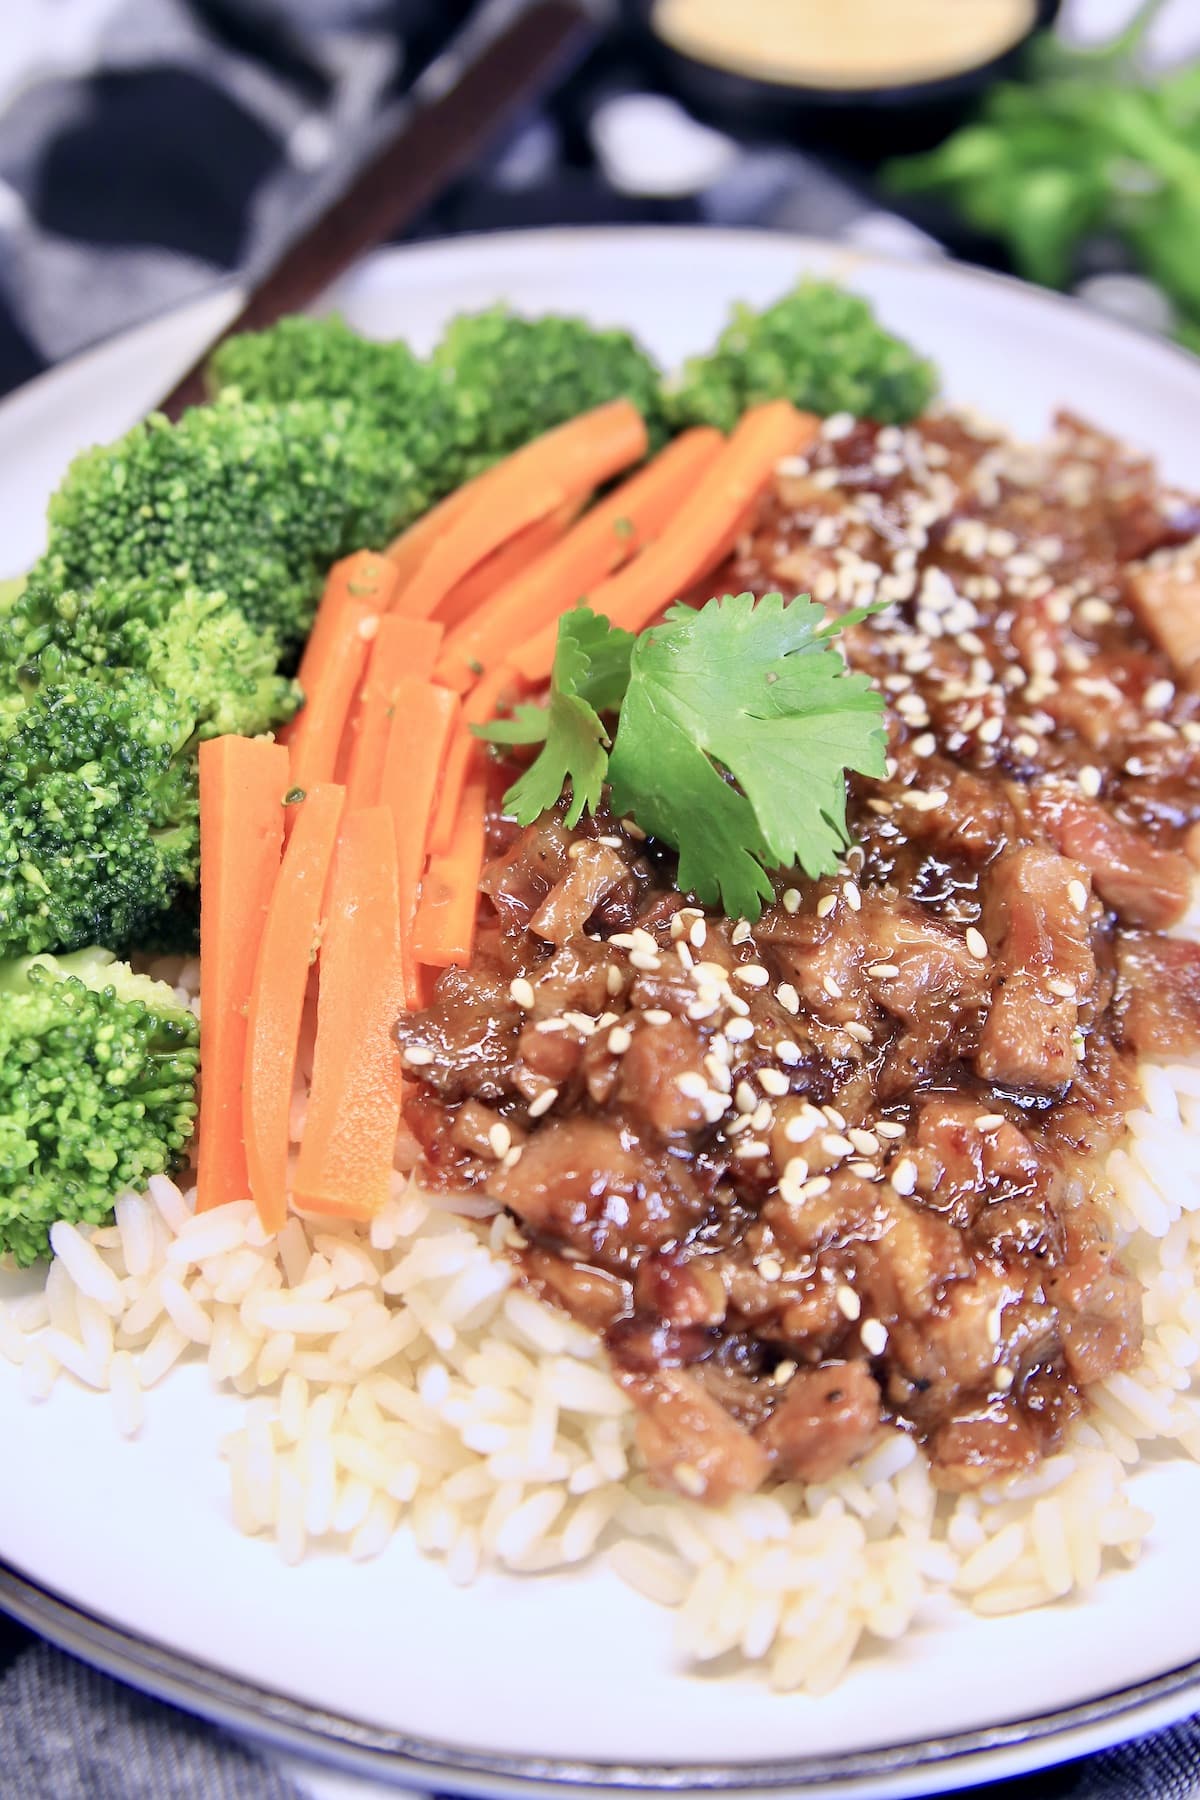 Plate of rice with Mongolian pork, broccoli and carrots.